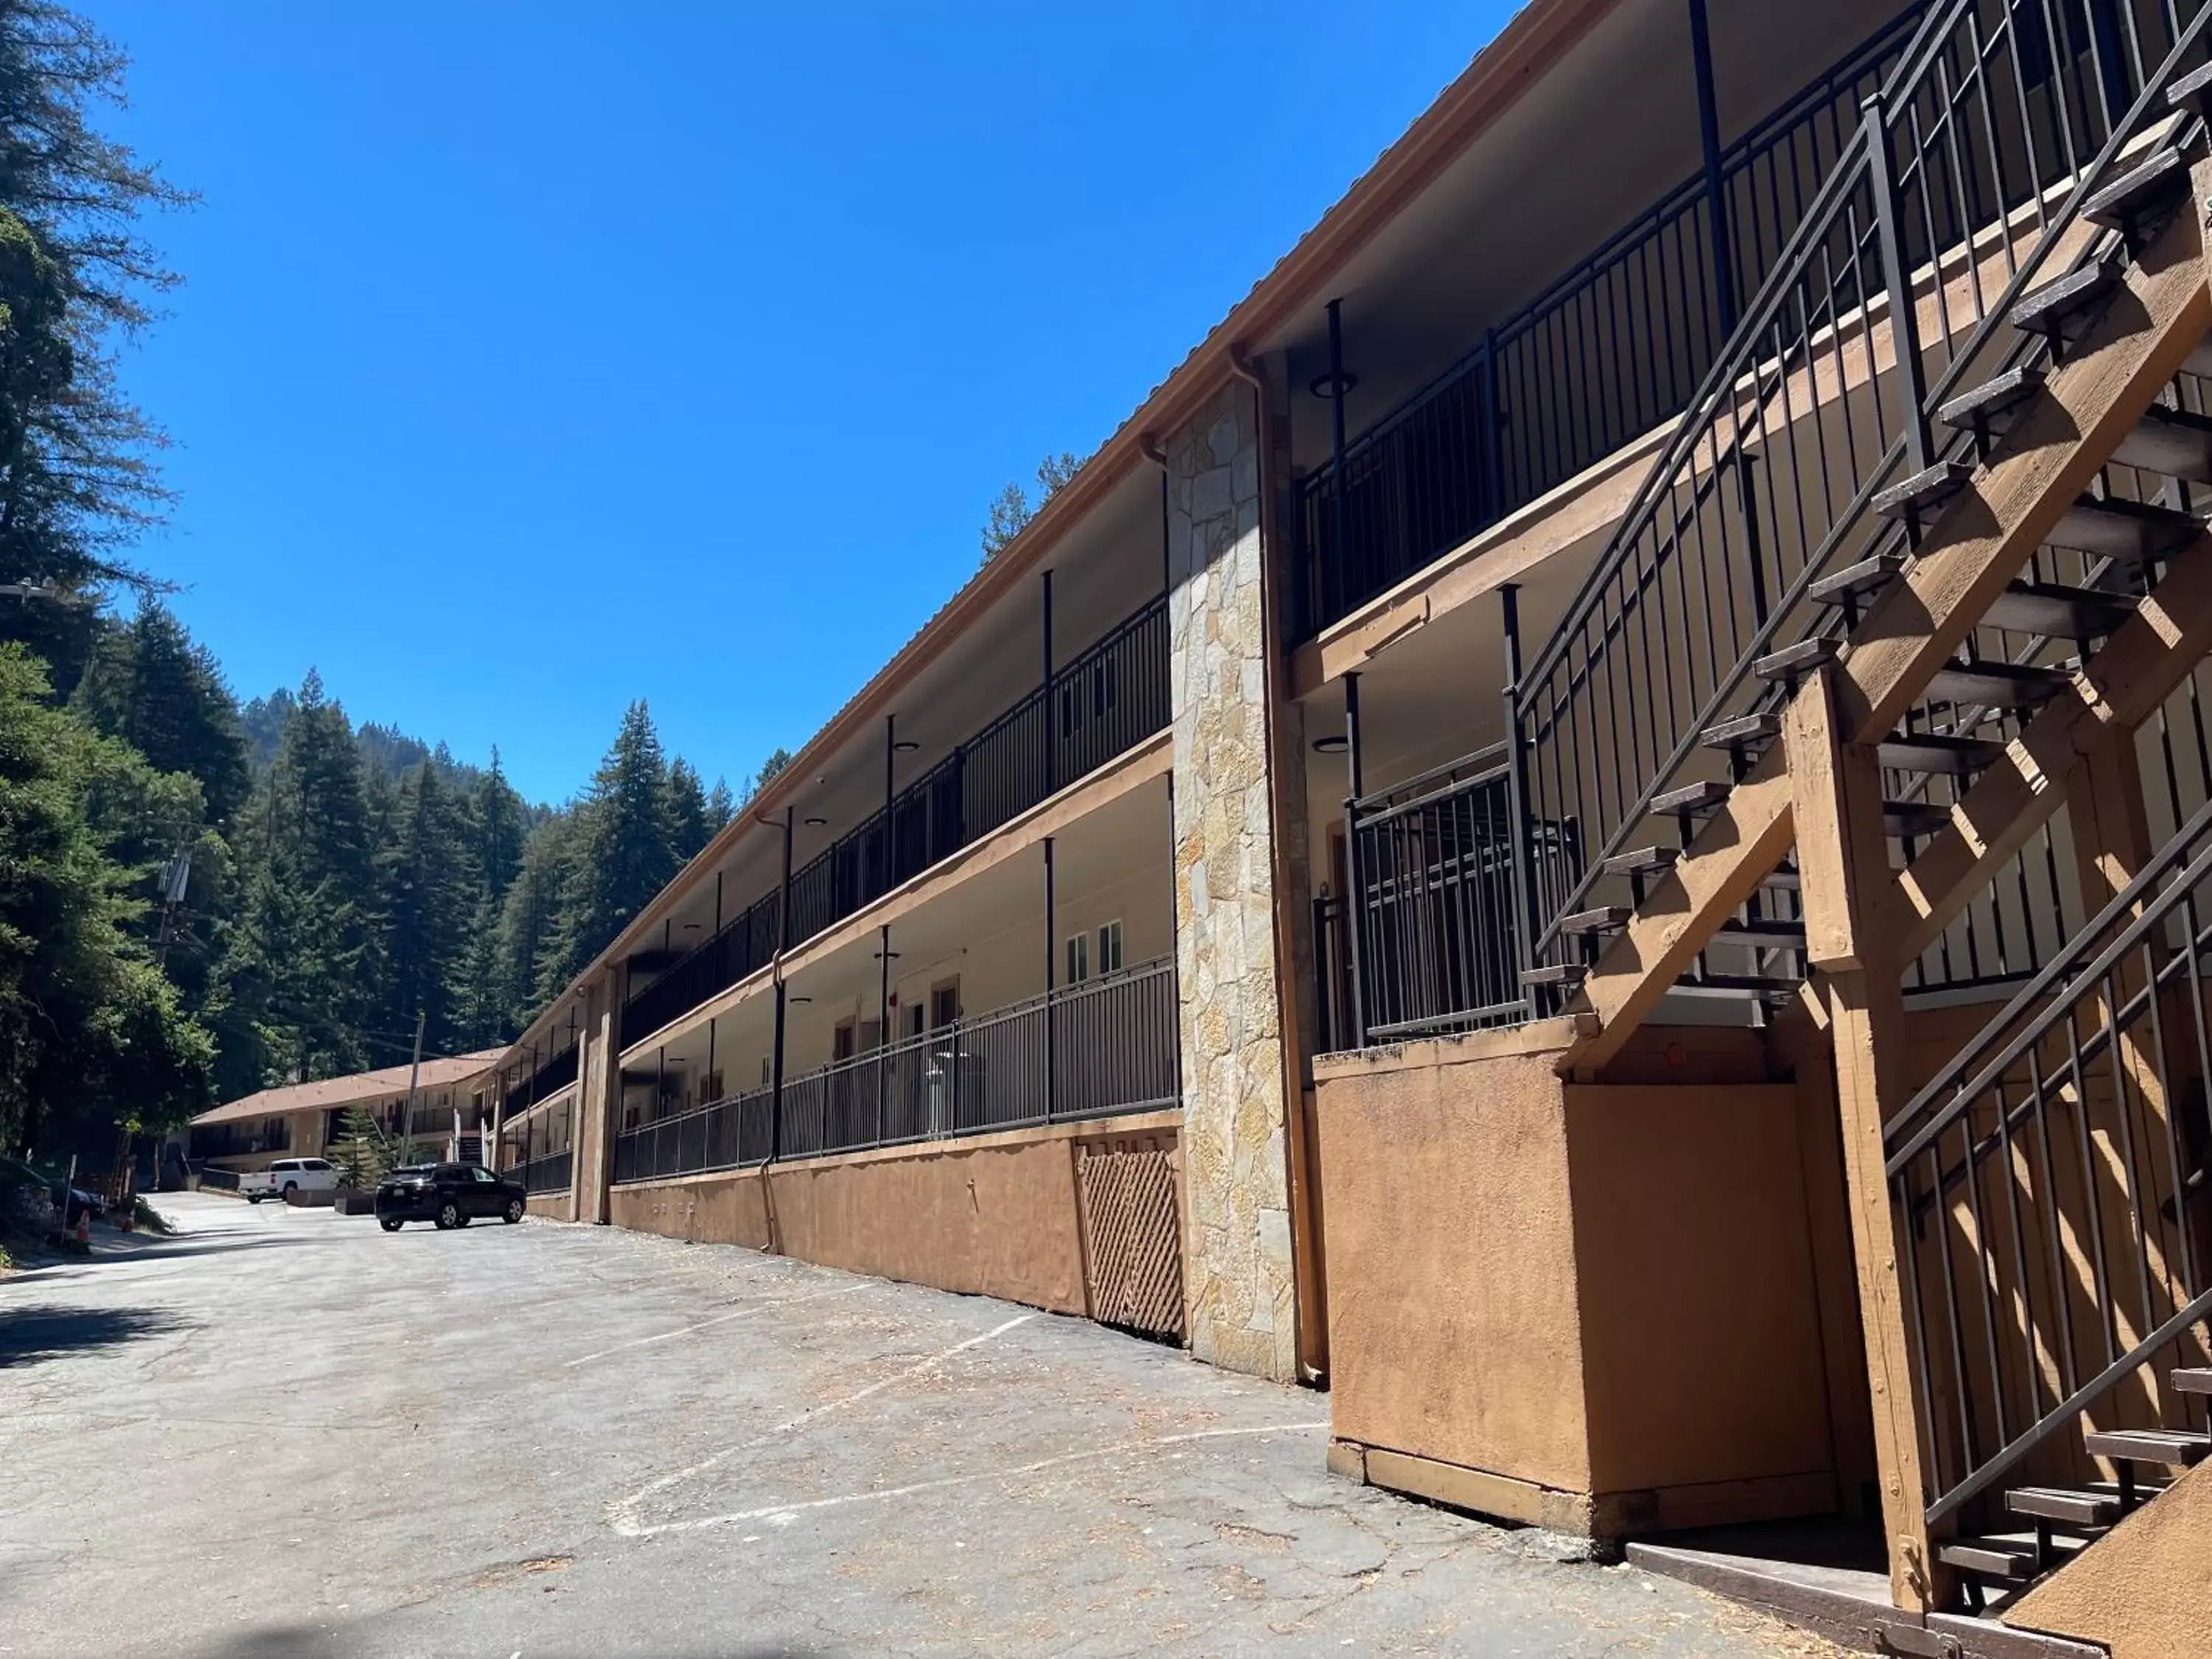 Parking, Property Building in The Historic Brookdale Lodge, Santa Cruz Mountains